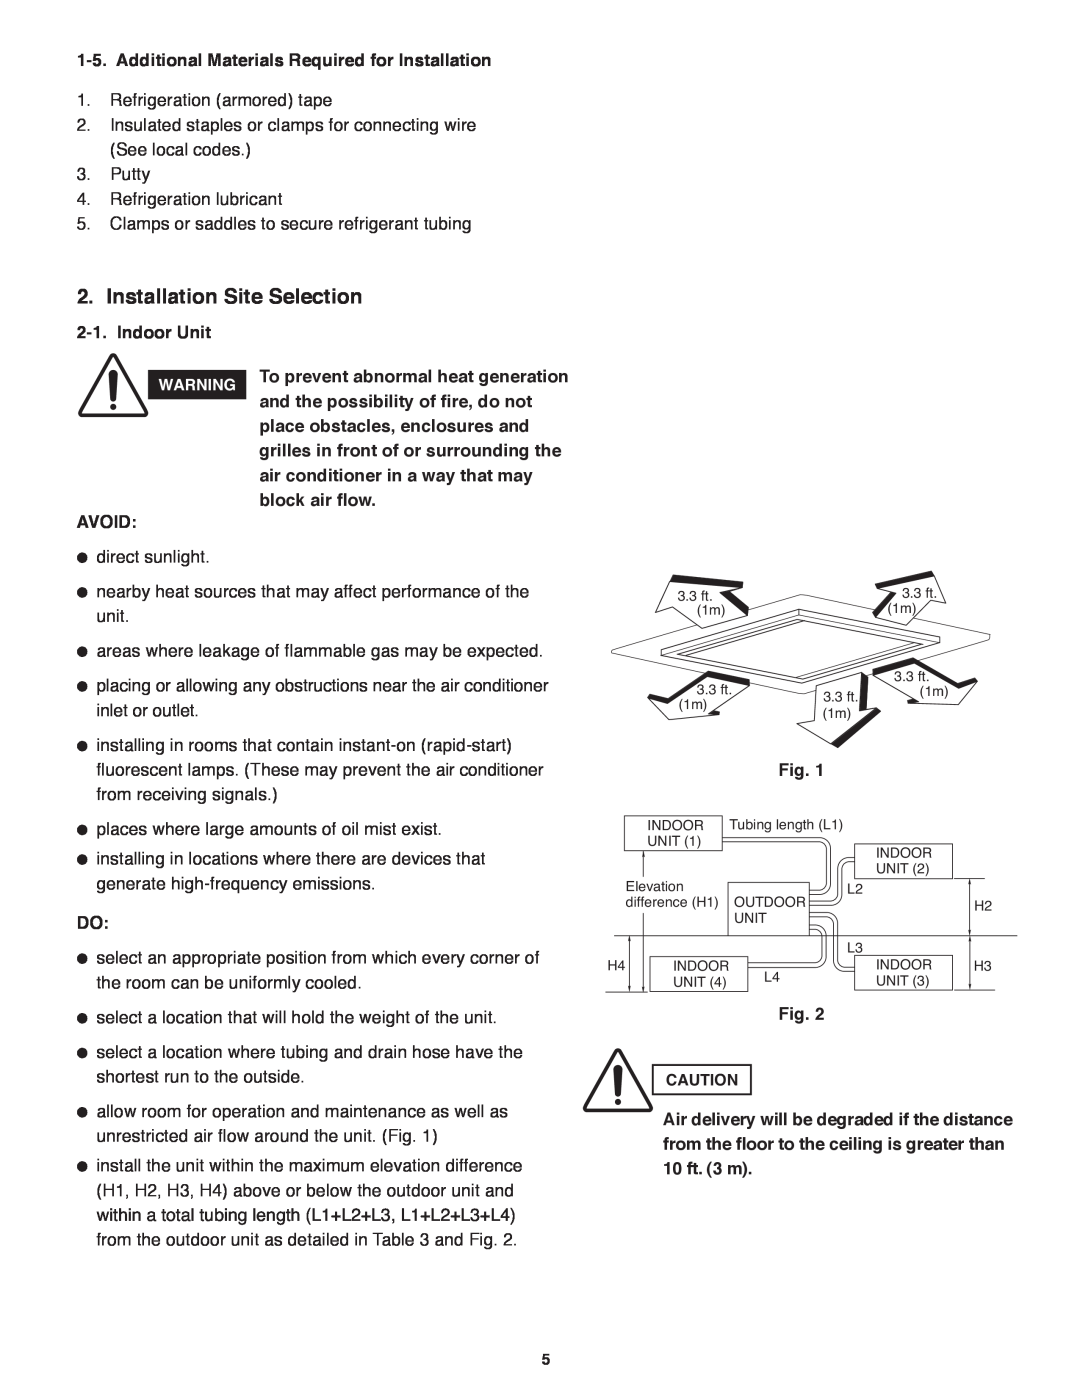 Panasonic R410A service manual Installation Site Selection, Indoor Unit, Avoid, Fig 